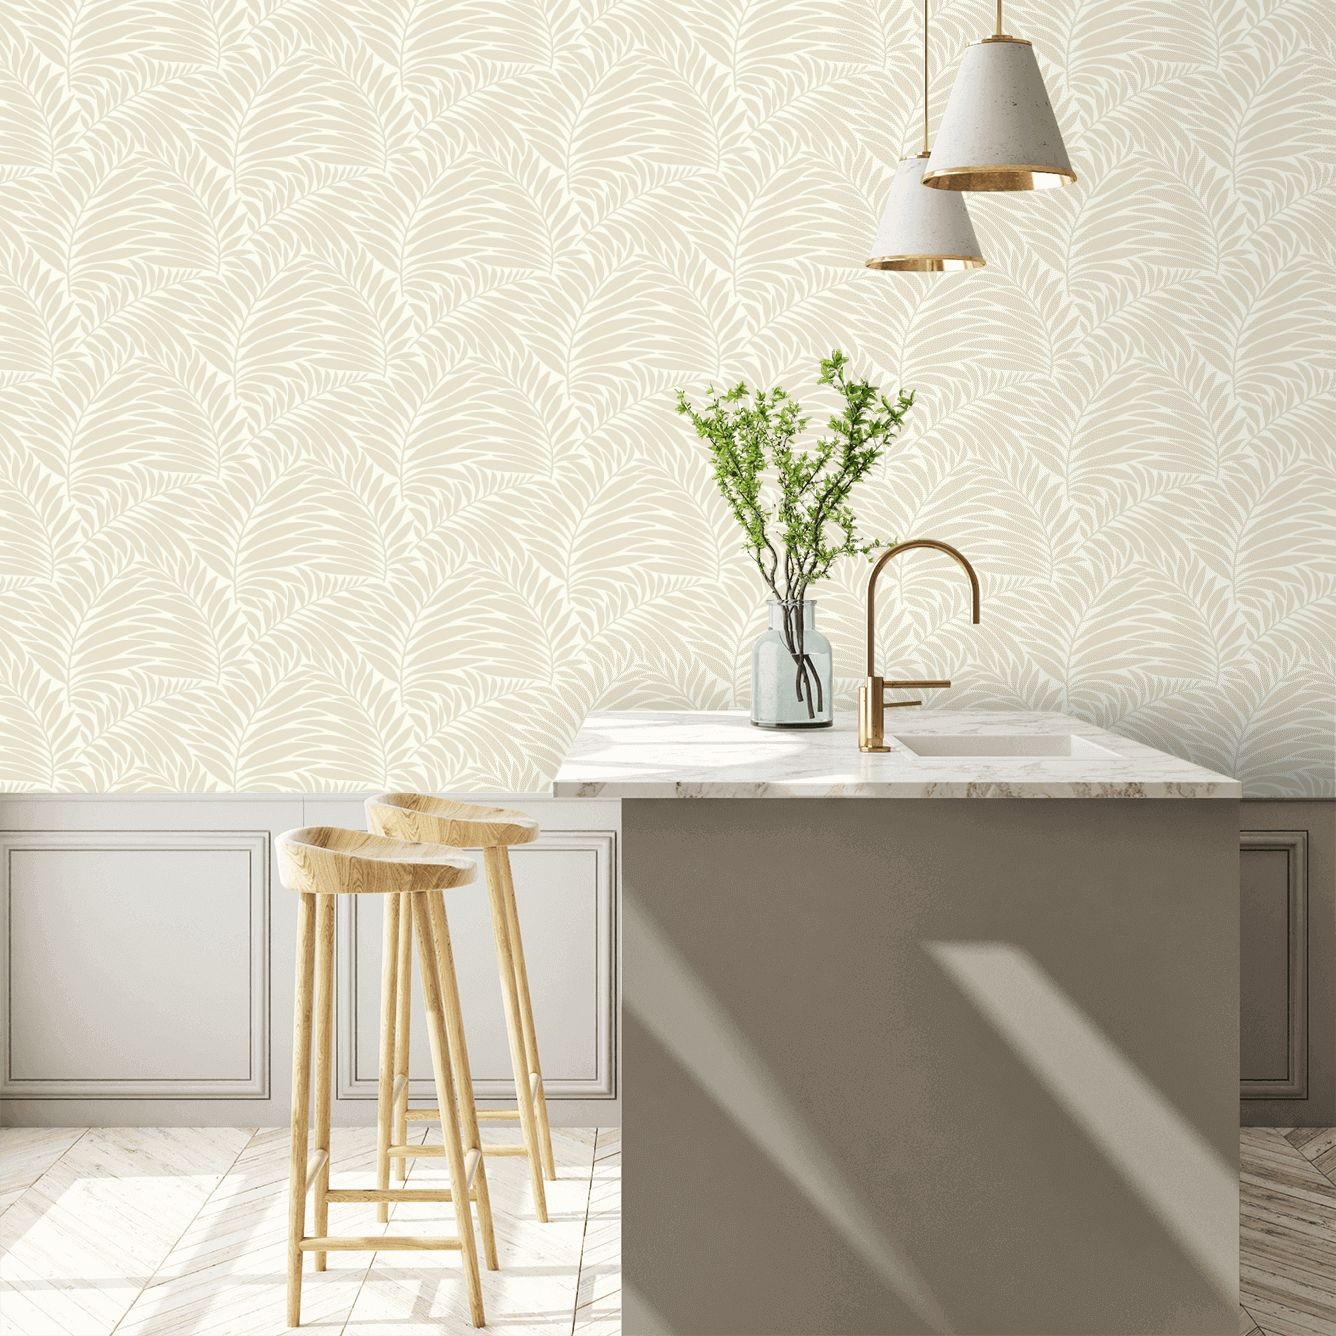 Myfair Flock Wallpaper - Cream and Pink - By Engblad and Co - 6381